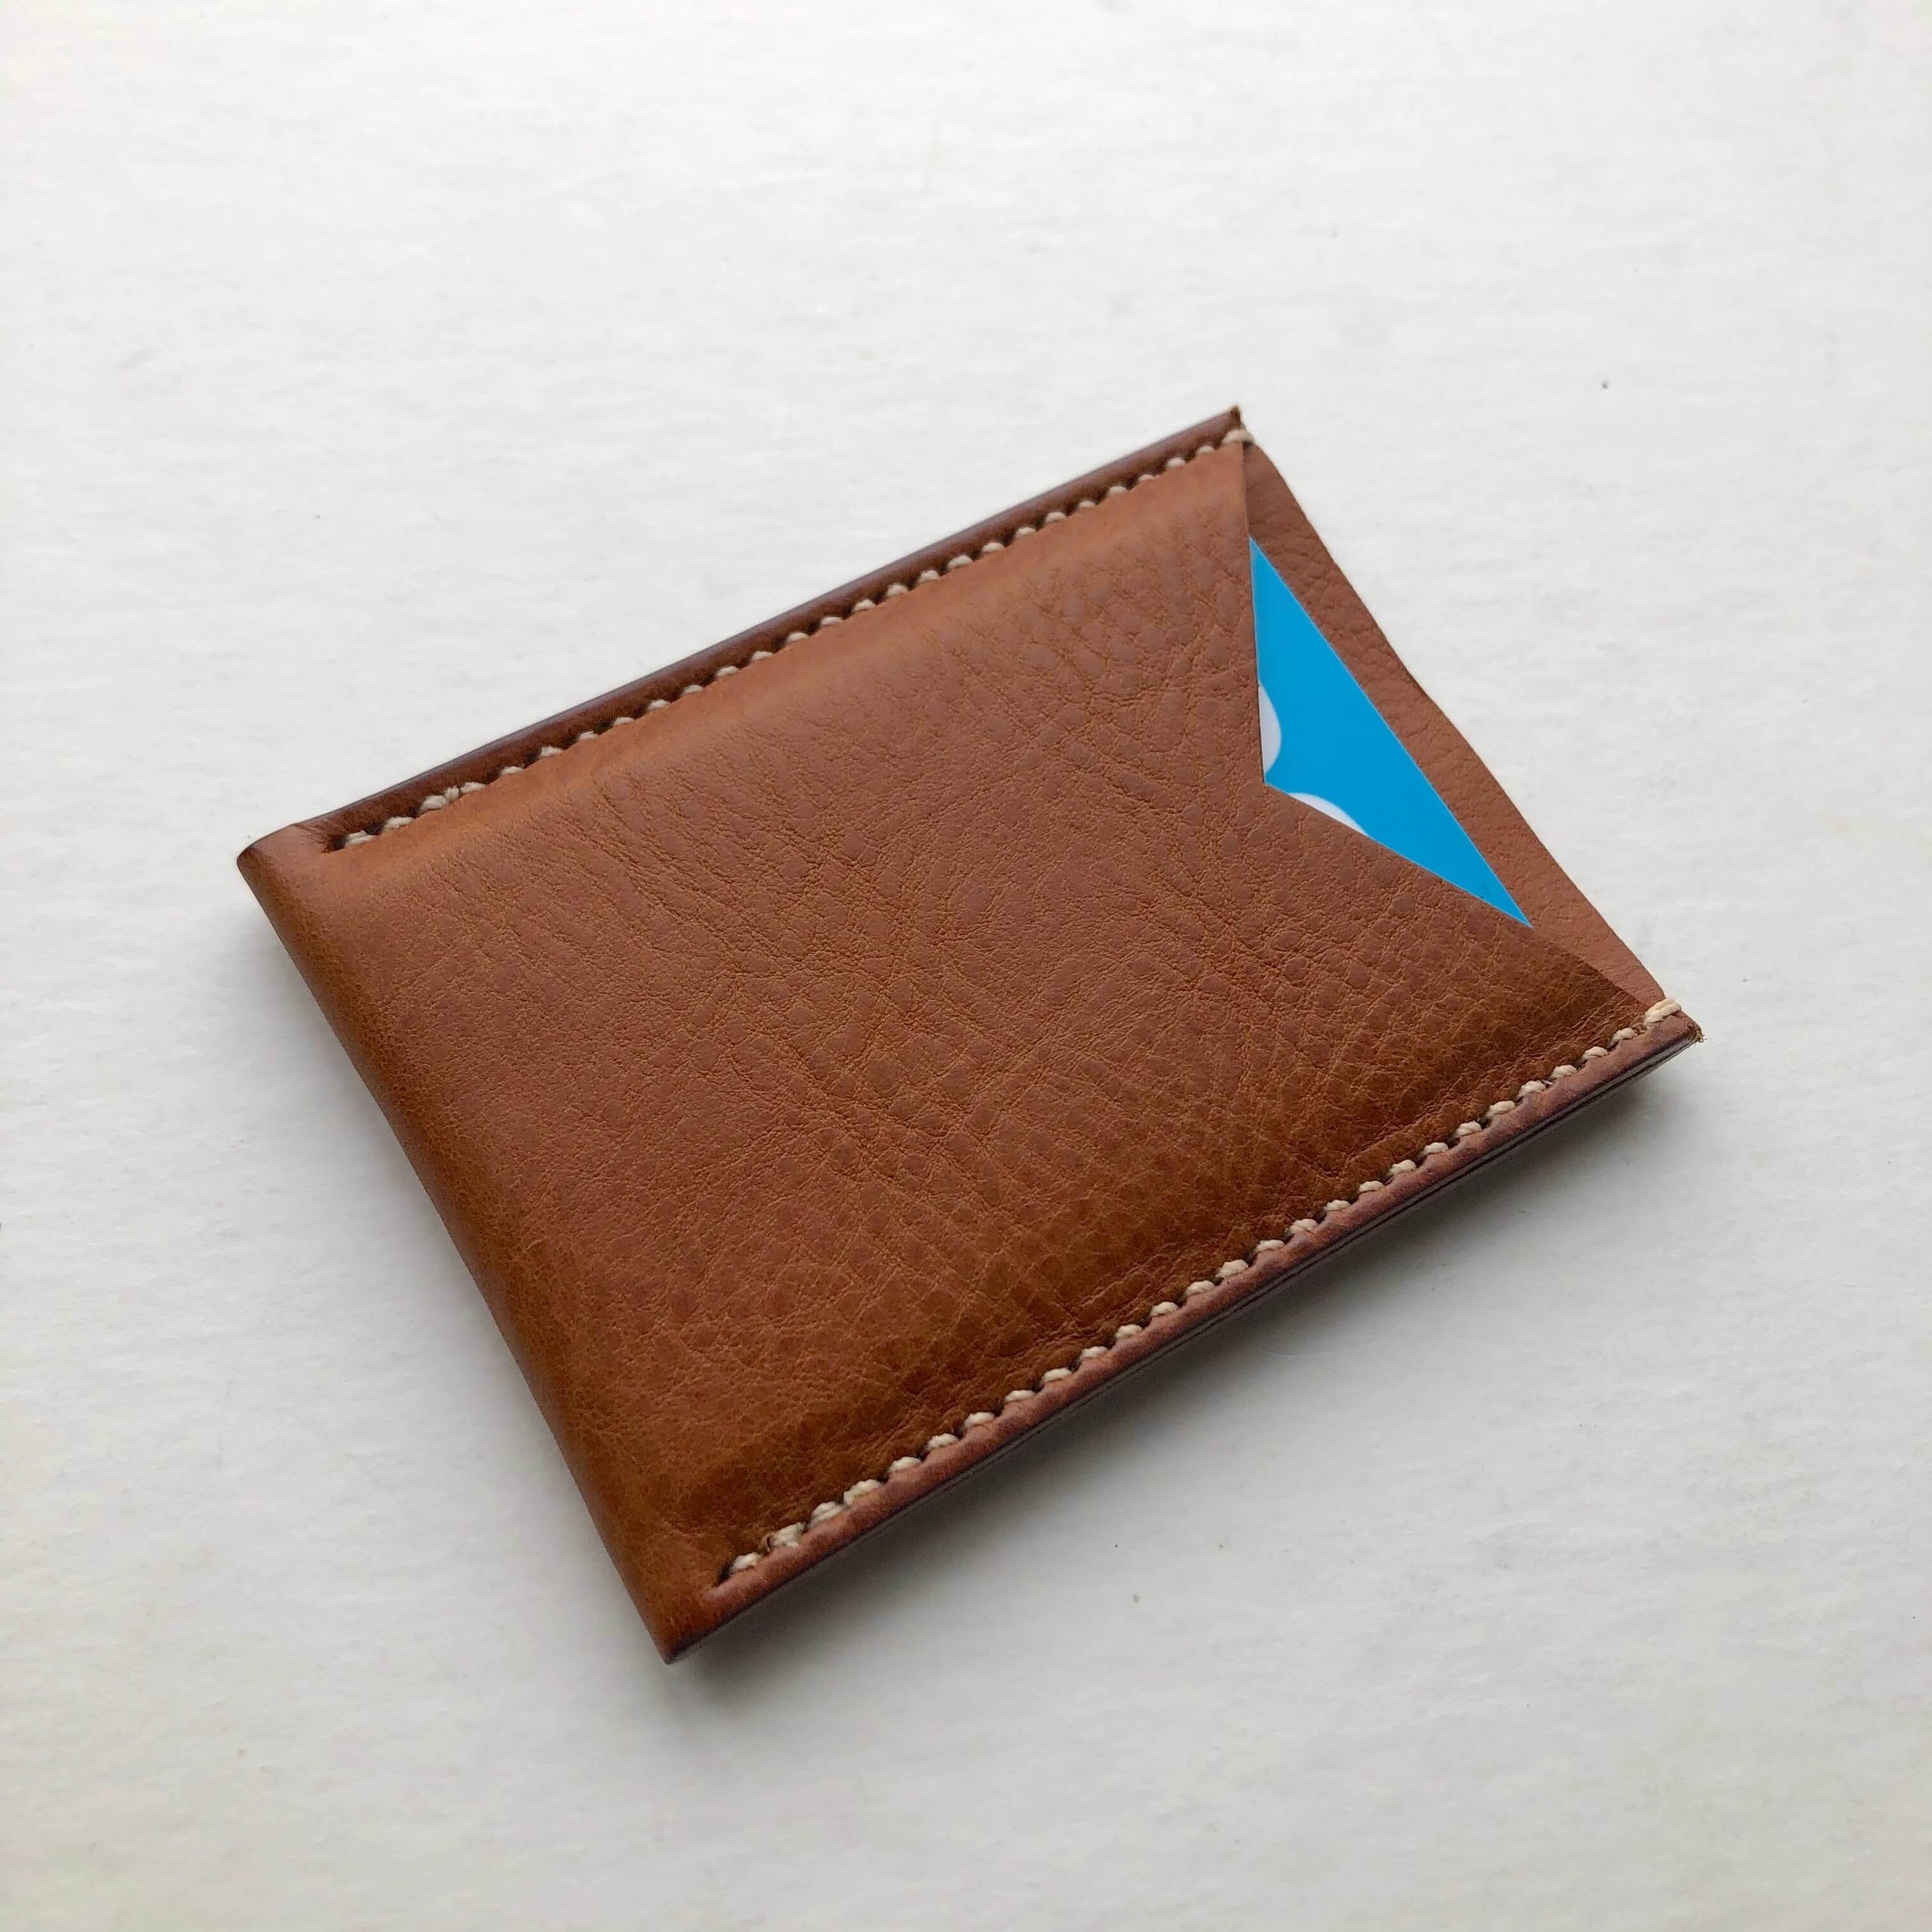 CARV sustainable leather wallet in tan handmade in the UK